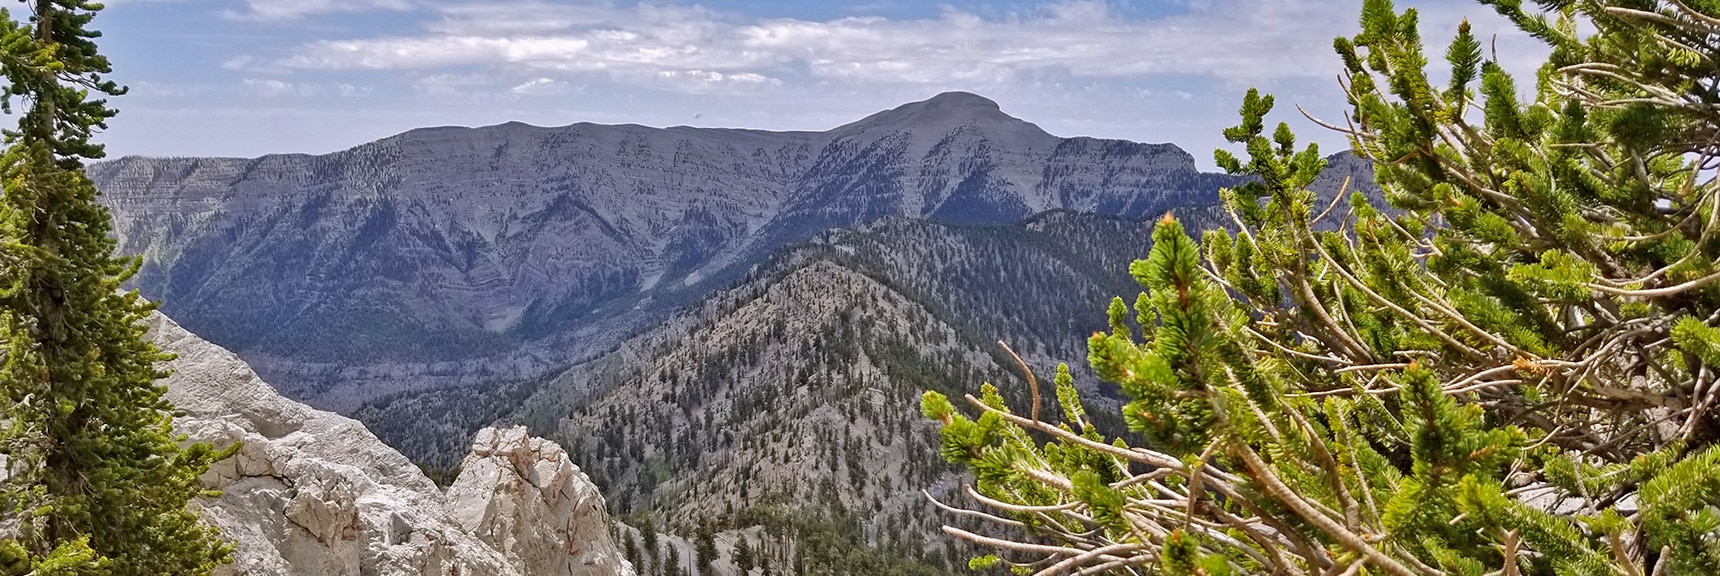 Charleston Peak and the North Ridge of Kyle Canyon from Mummy Mt. NW Cliffs | Mummy Mountain NW Cliffs | Mt Charleston Wilderness | Spring Mountains, Nevada